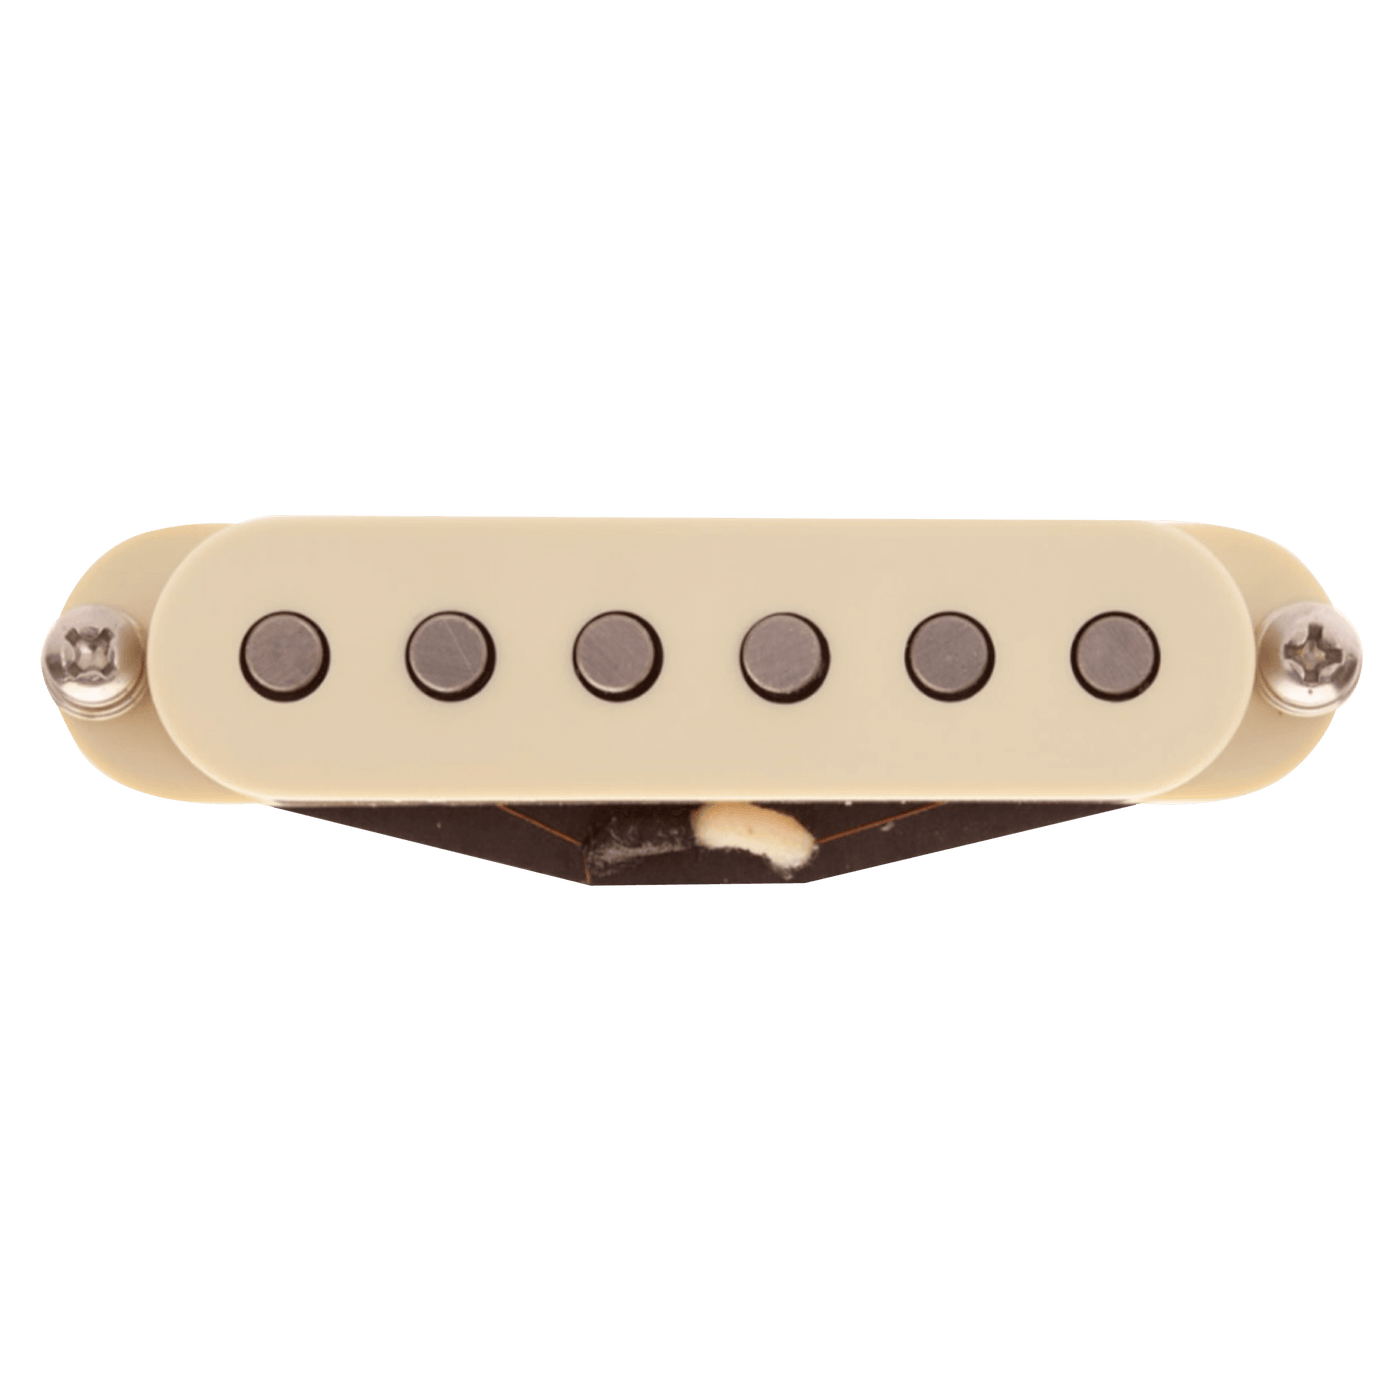 Suhr V63 Parchment (Neck) - $129990 - Gearhub - Suhr’s V63 pickups are wound to have the same tonal characteristics as those found by John Suhr in a particularly sweet 1963 S type guitar. The magnets are made by the same company that made the magnets for Fender® in the early 60’s and have the exact same formulation and use the same manufacturing process. Magnet • Alnico V Special DC Resistance • 6.4K Ω Hook Up Wire • Braided Cloth Covers • Parchment